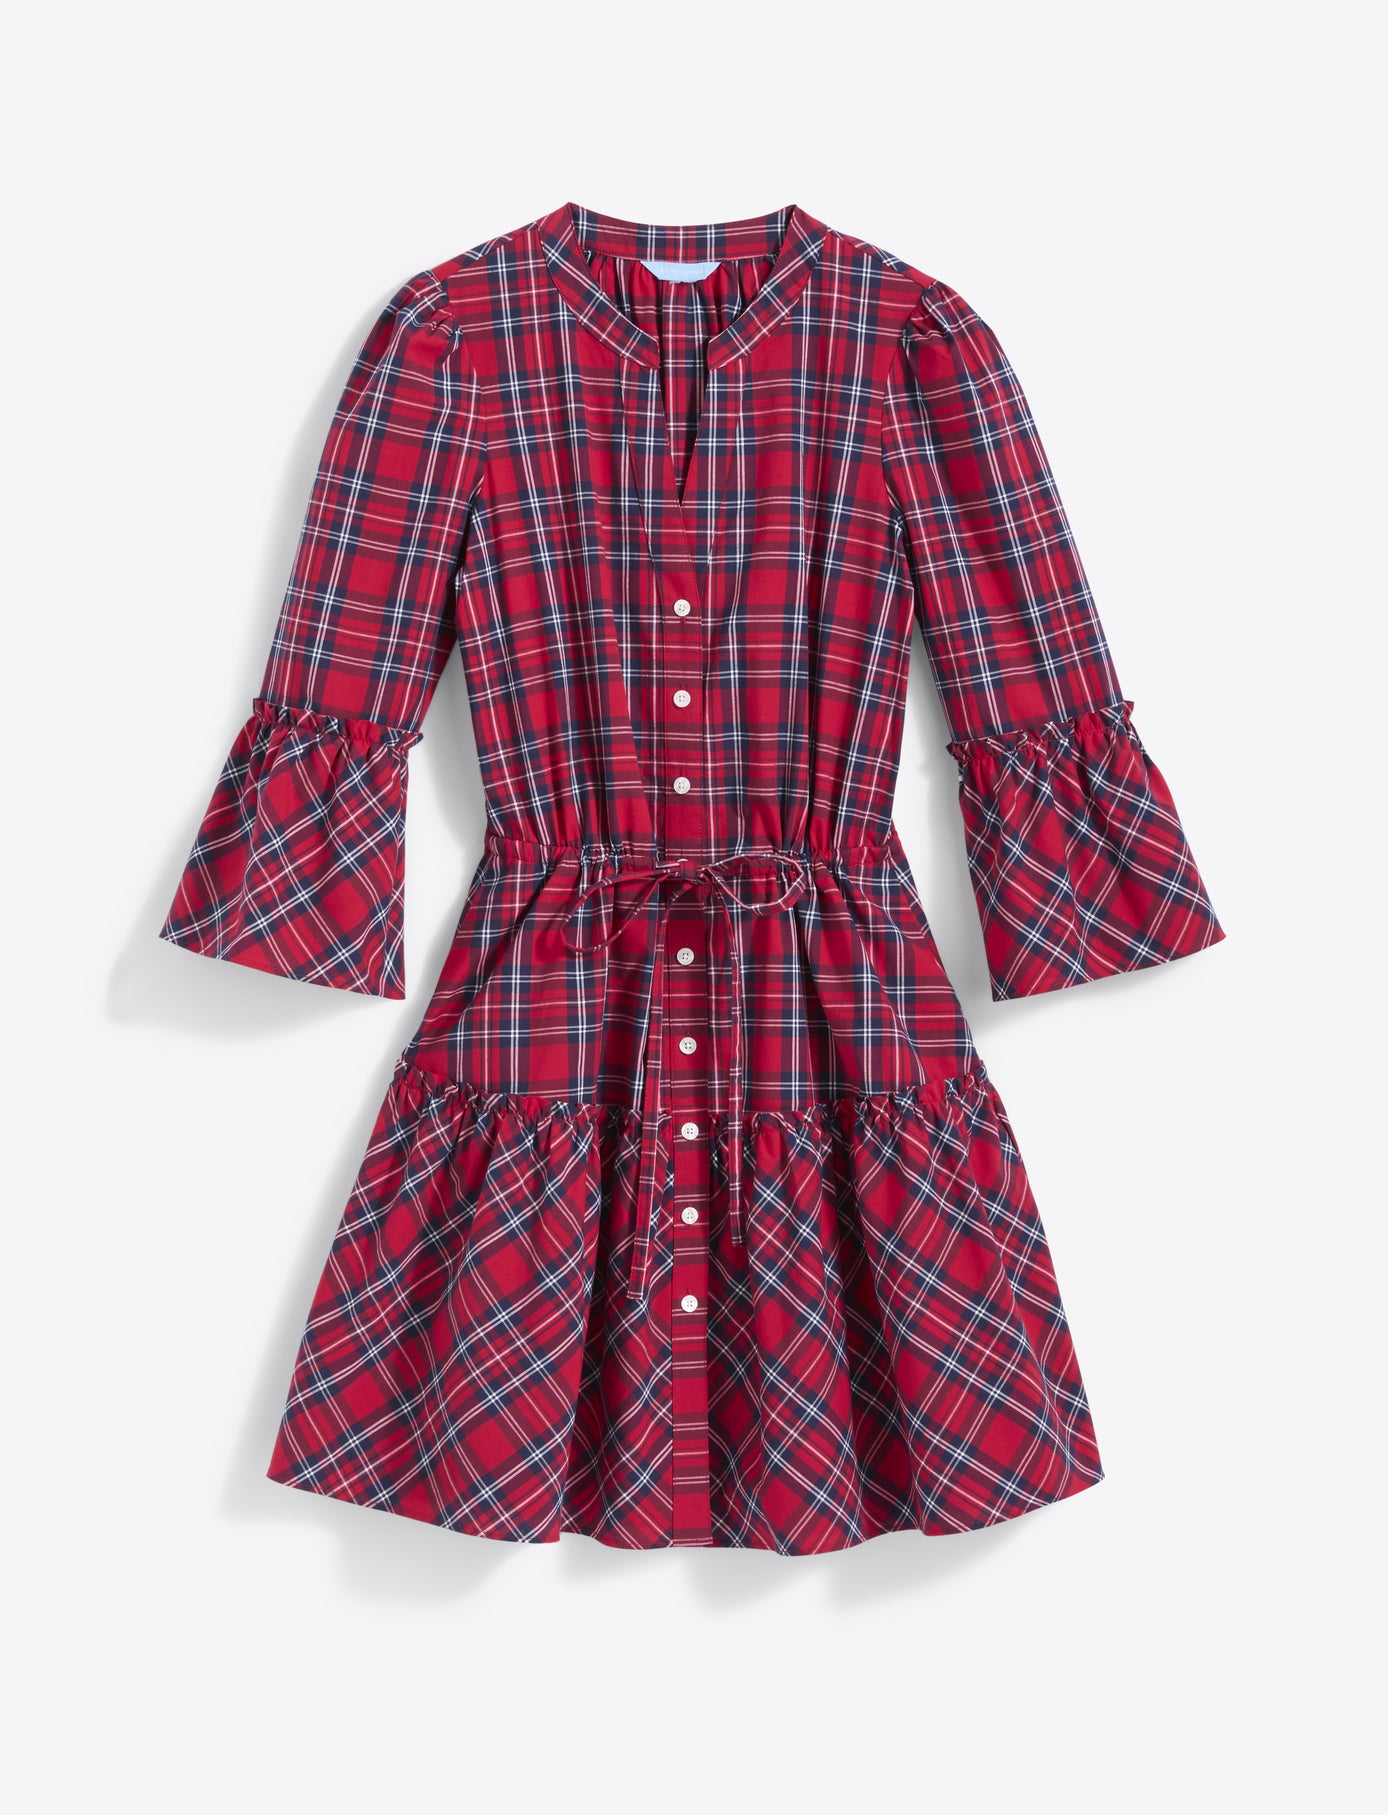 Avery Shirtdress in Angie Plaid